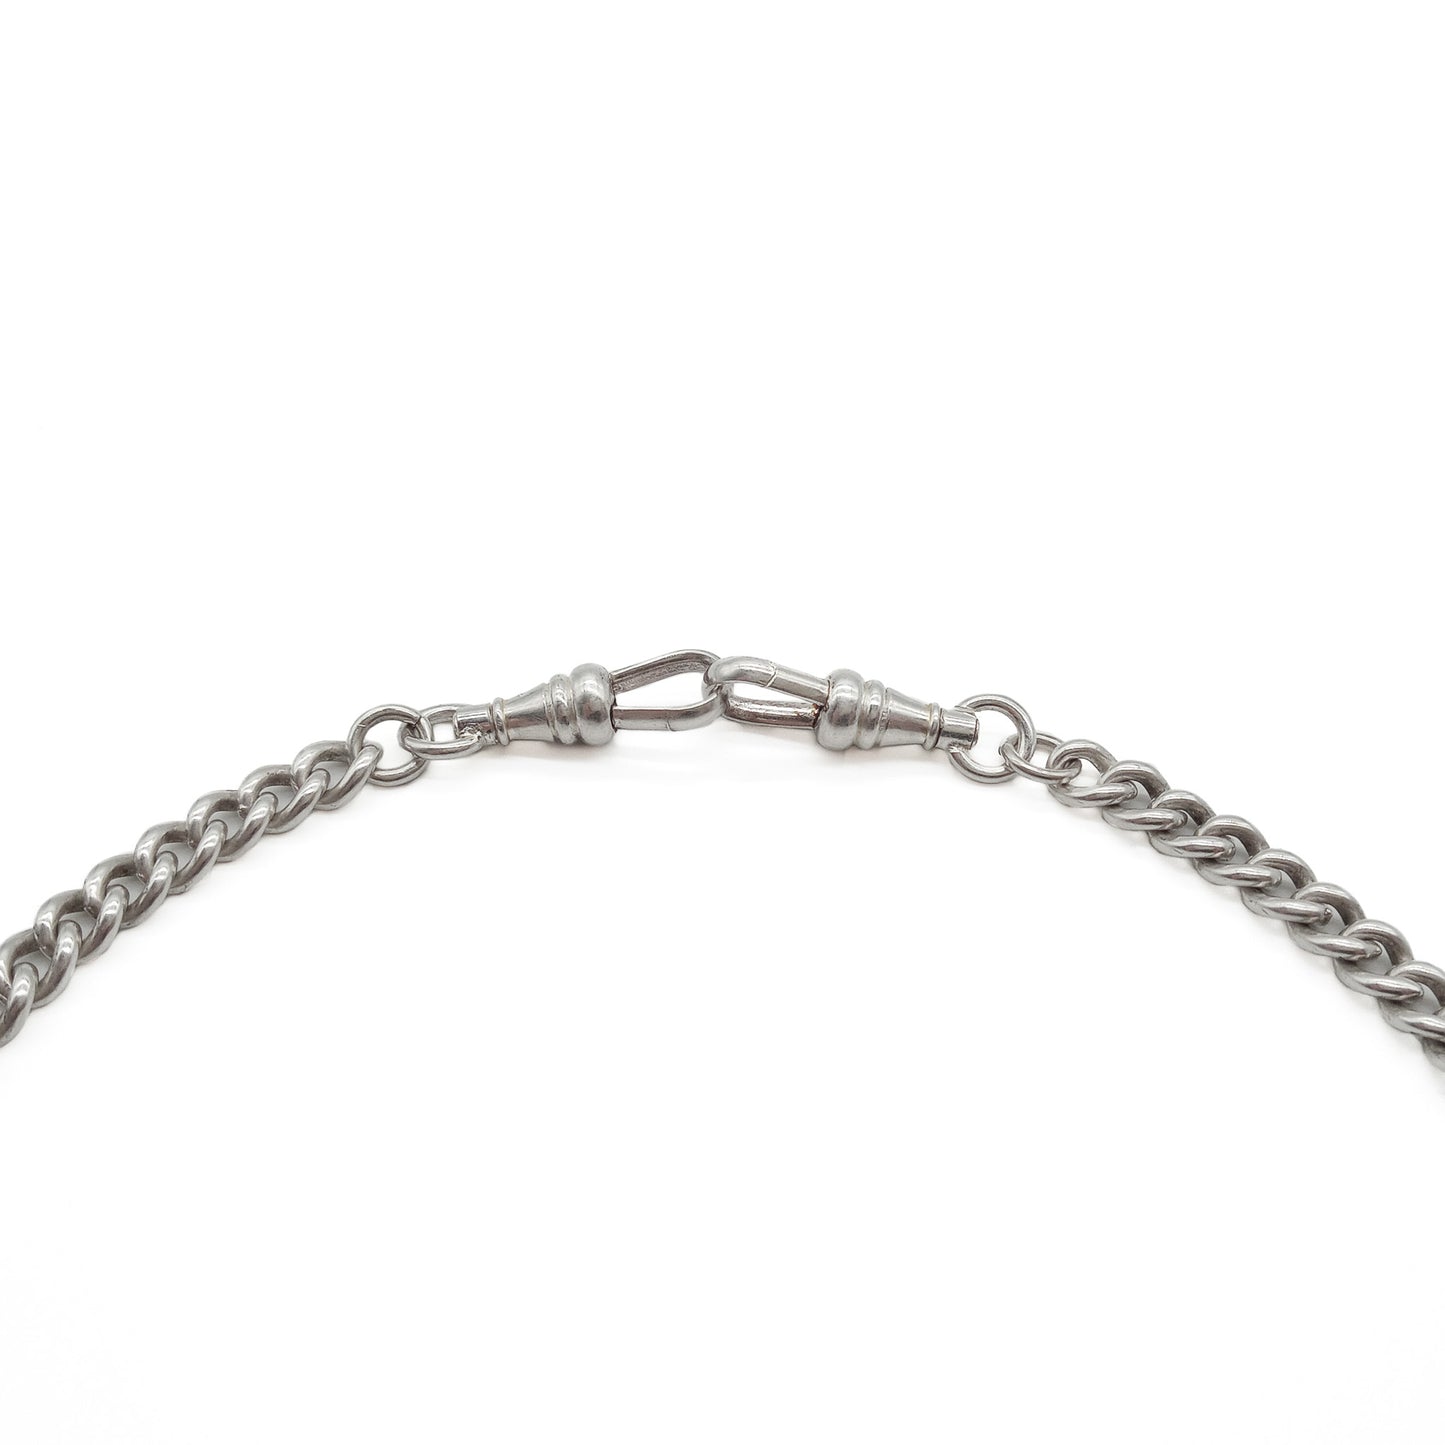 Classic Victorian sterling silver curb link fob chain with two dog clips and a t-bar. Every link is stamped.